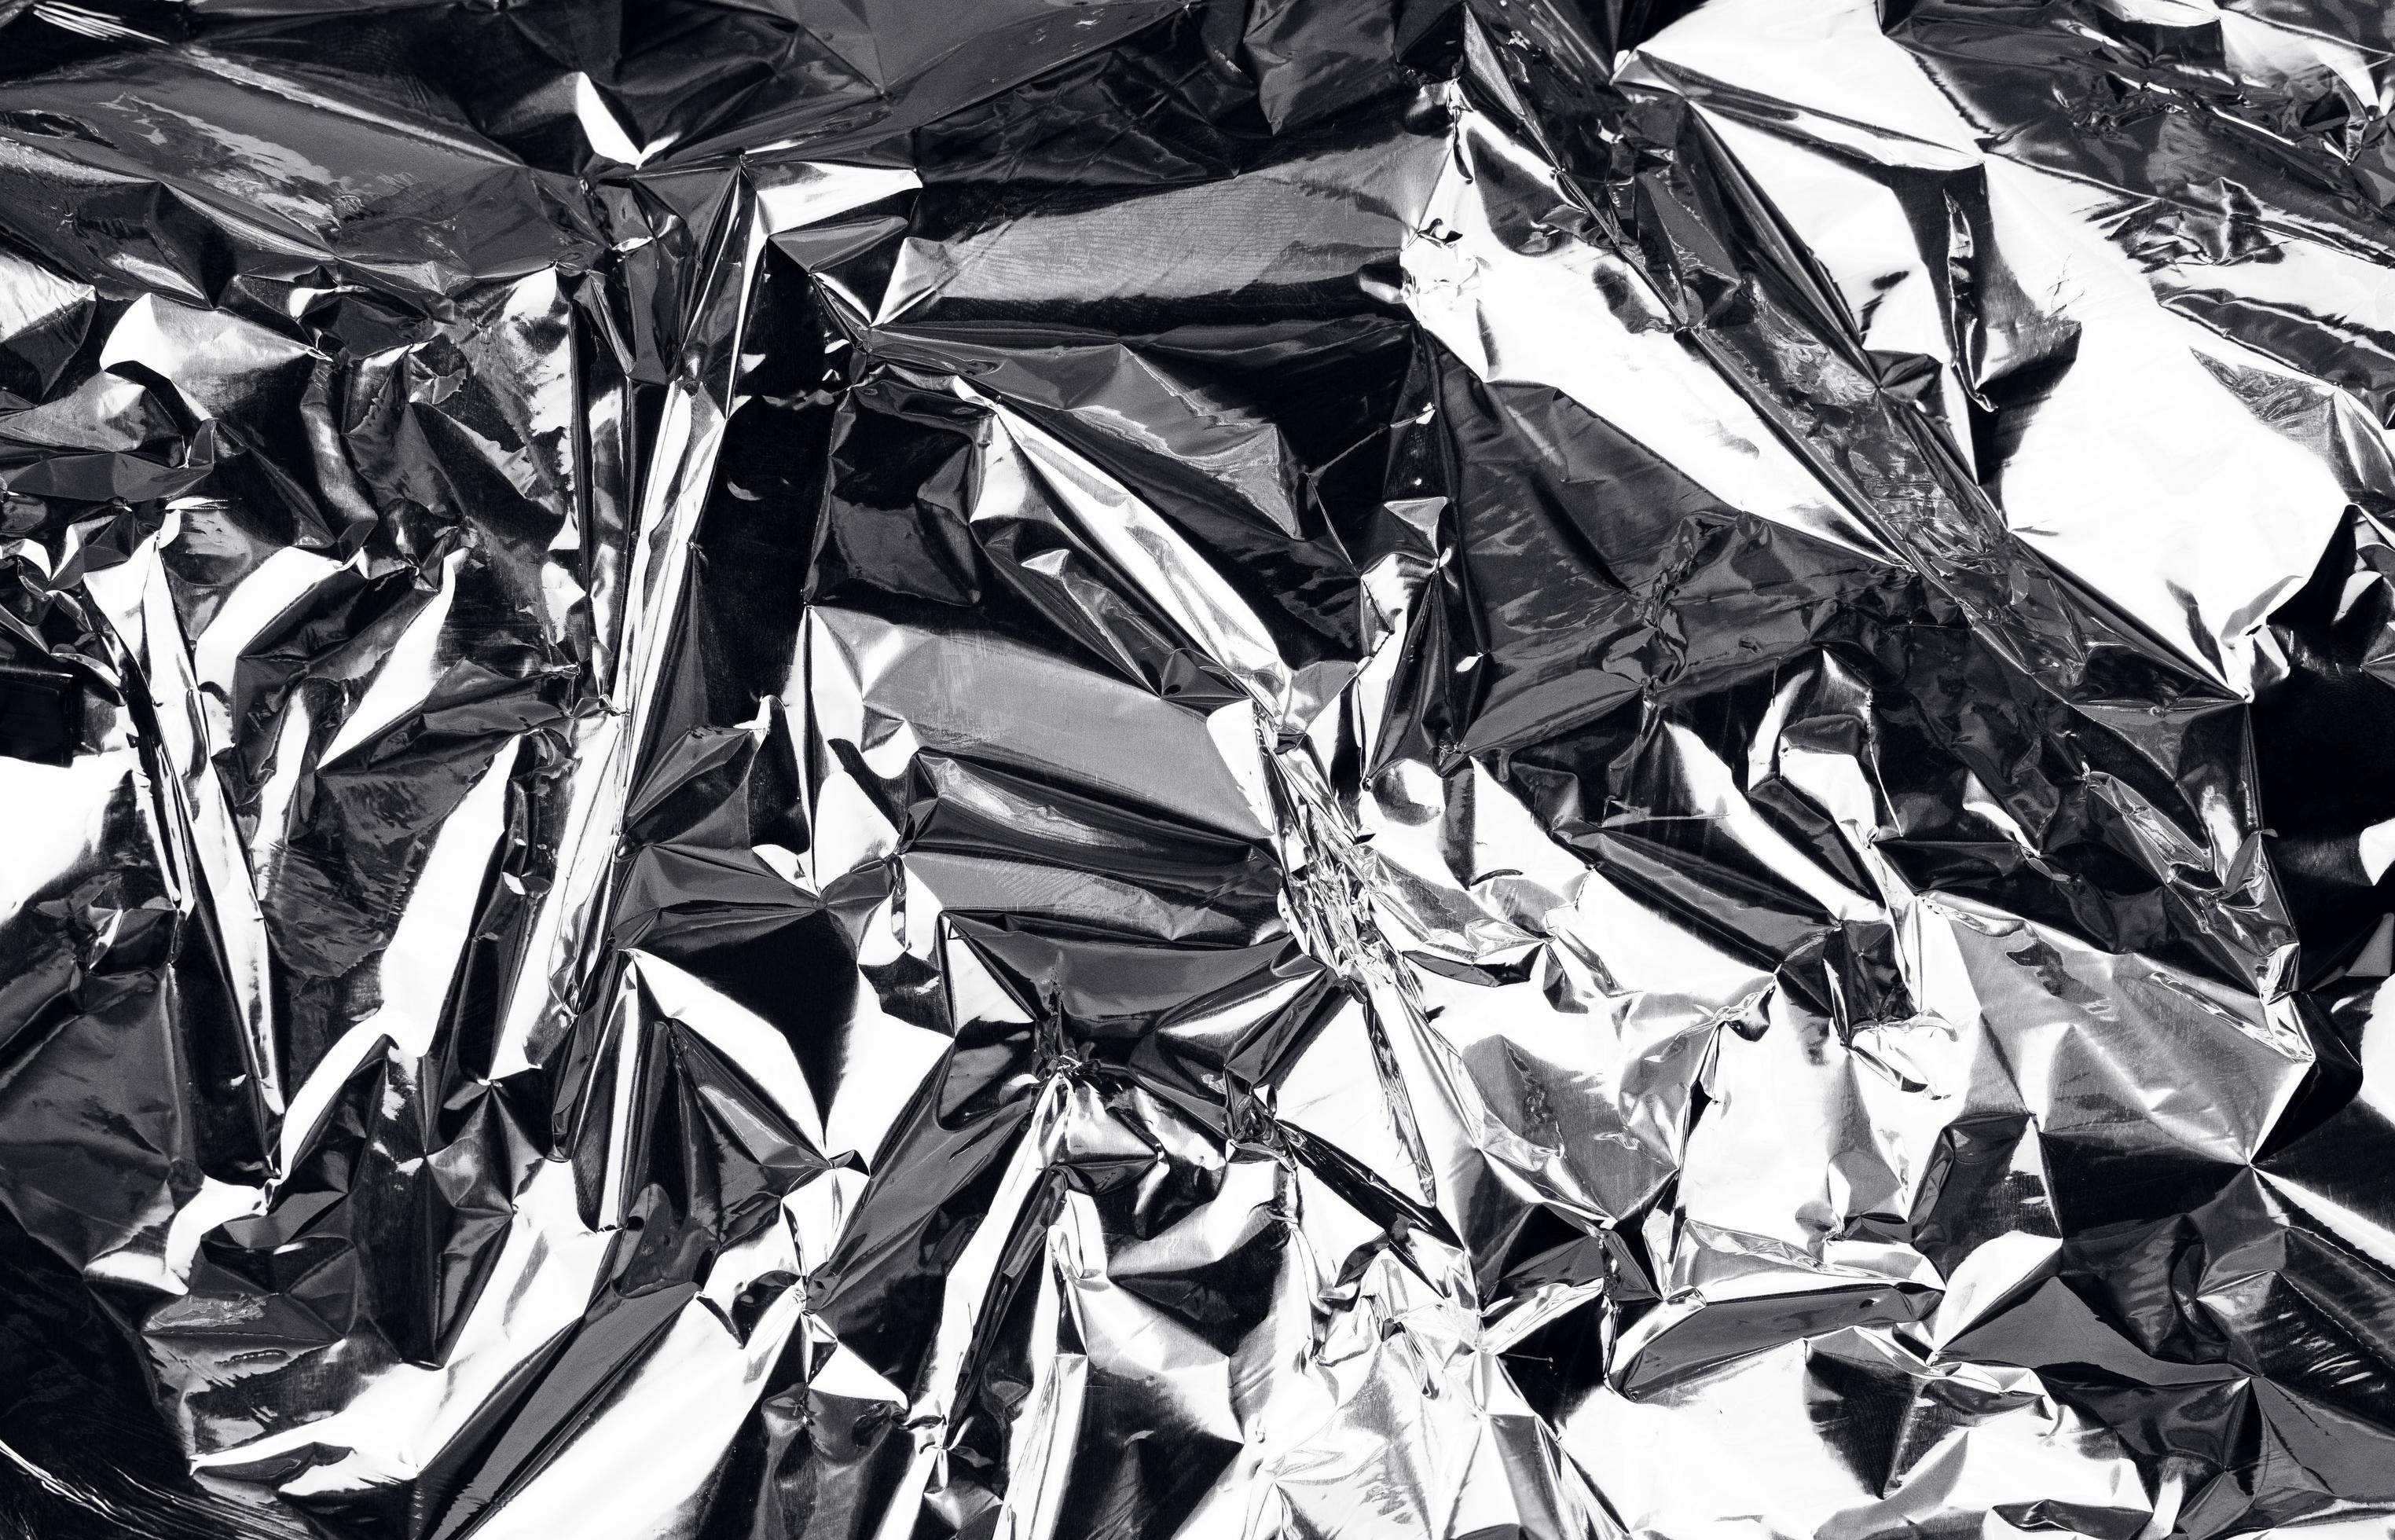 https://static.vecteezy.com/system/resources/previews/004/687/558/large_2x/crumpled-aluminum-foil-background-wrinkled-shiny-silver-foil-for-decoration-creative-design-element-in-shabby-shape-abstract-texture-surface-from-wrapping-paper-free-photo.jpg